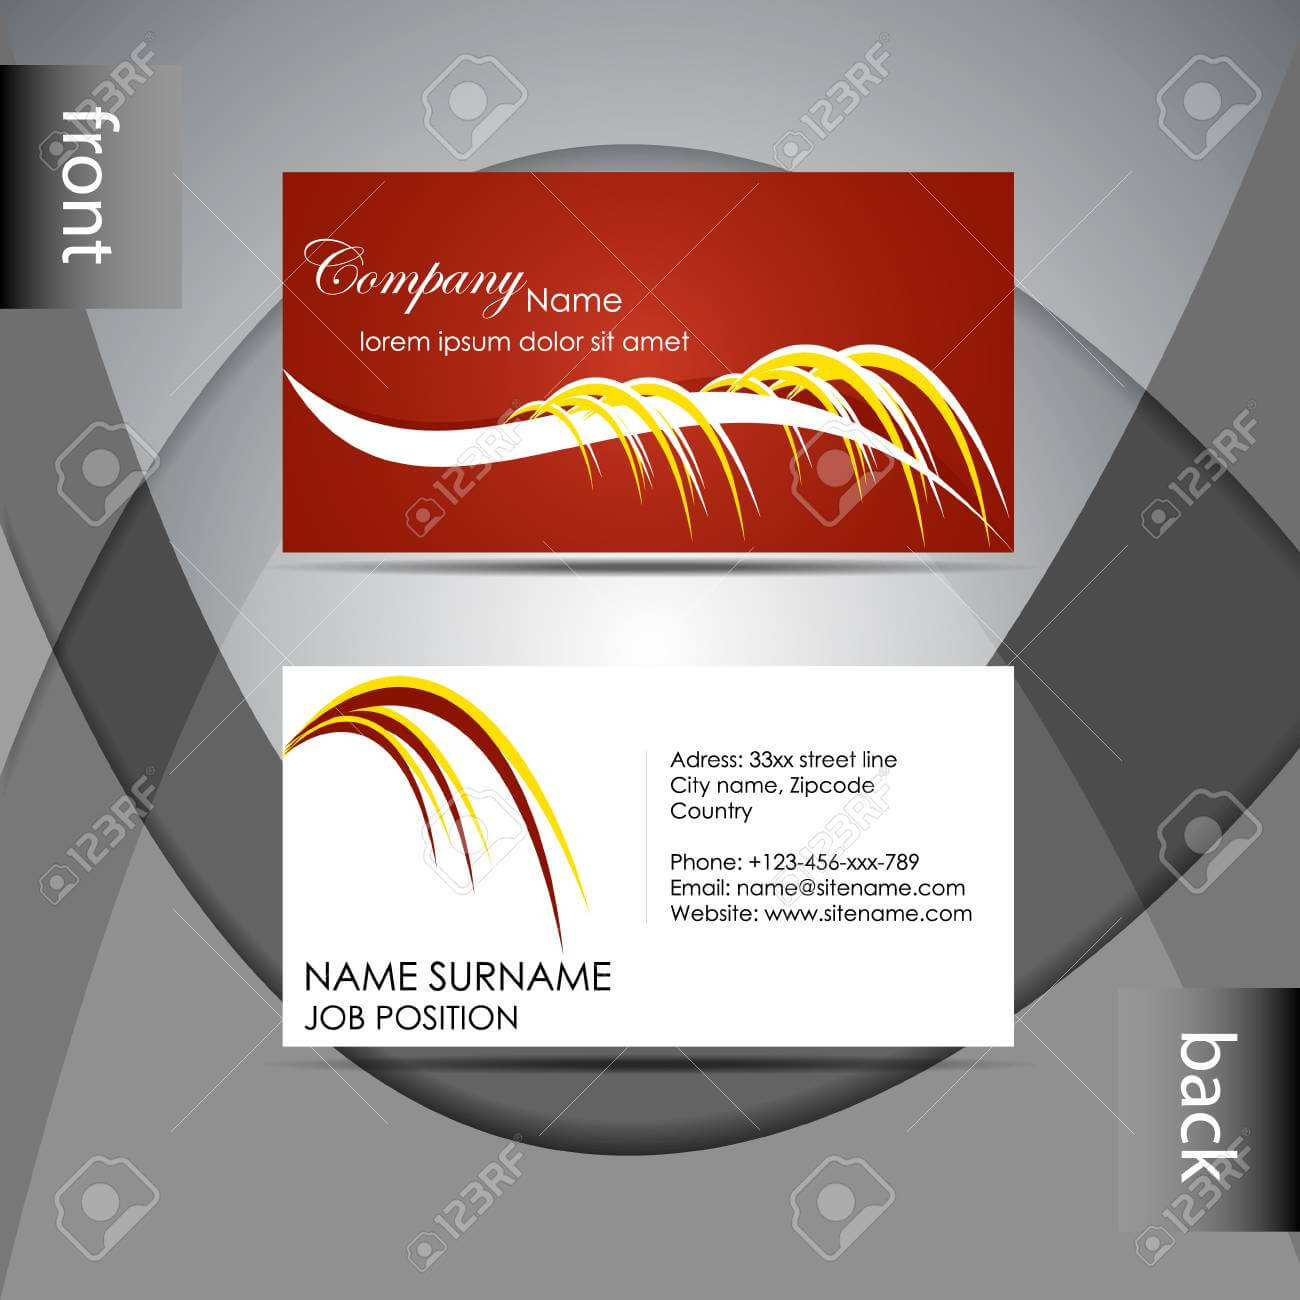 015 Template Ideas Professional Business Card Abstract Or Inside Professional Name Card Template